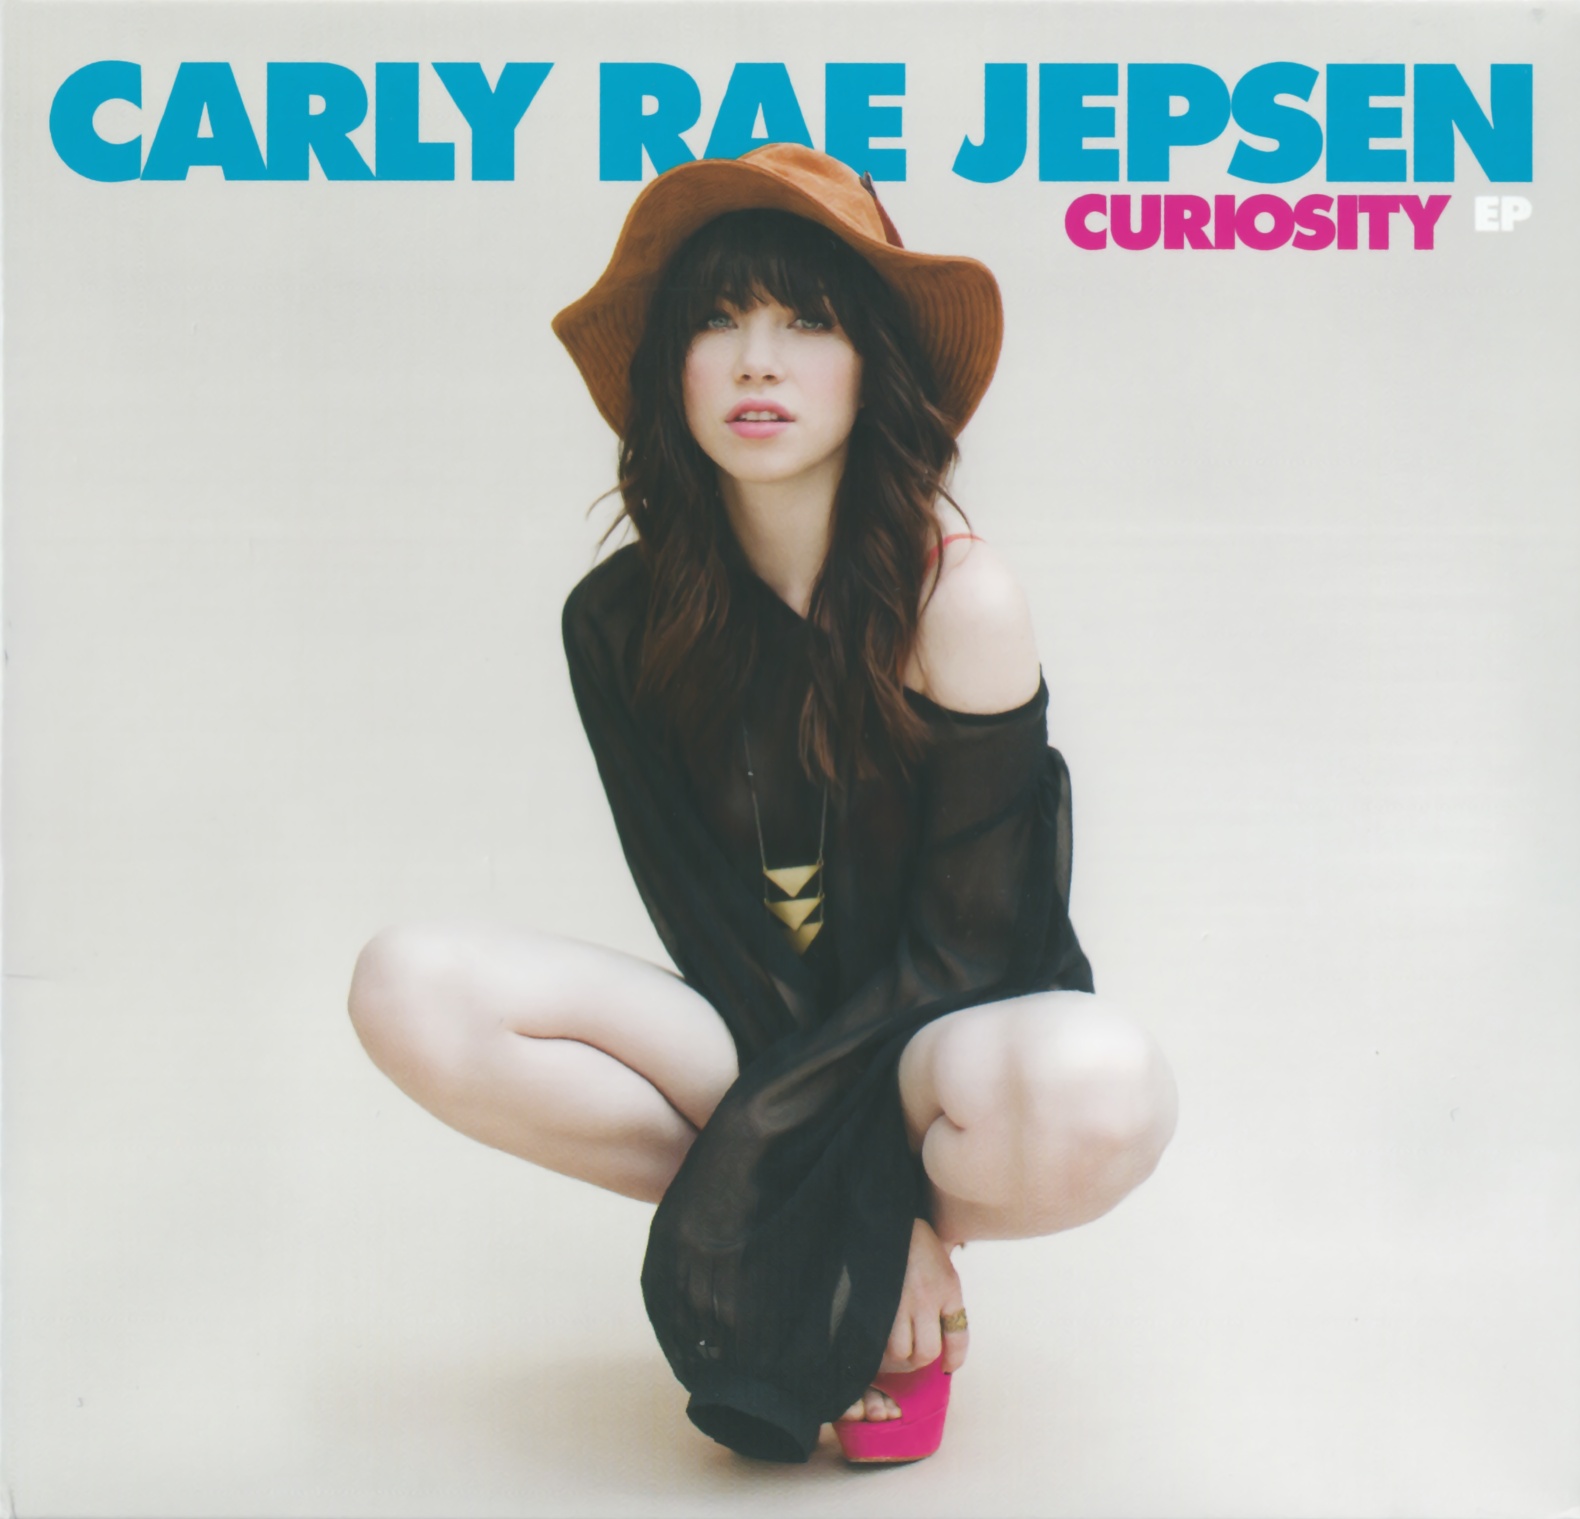 Carly Rae Jepsen, Call Me Maybe, Voice